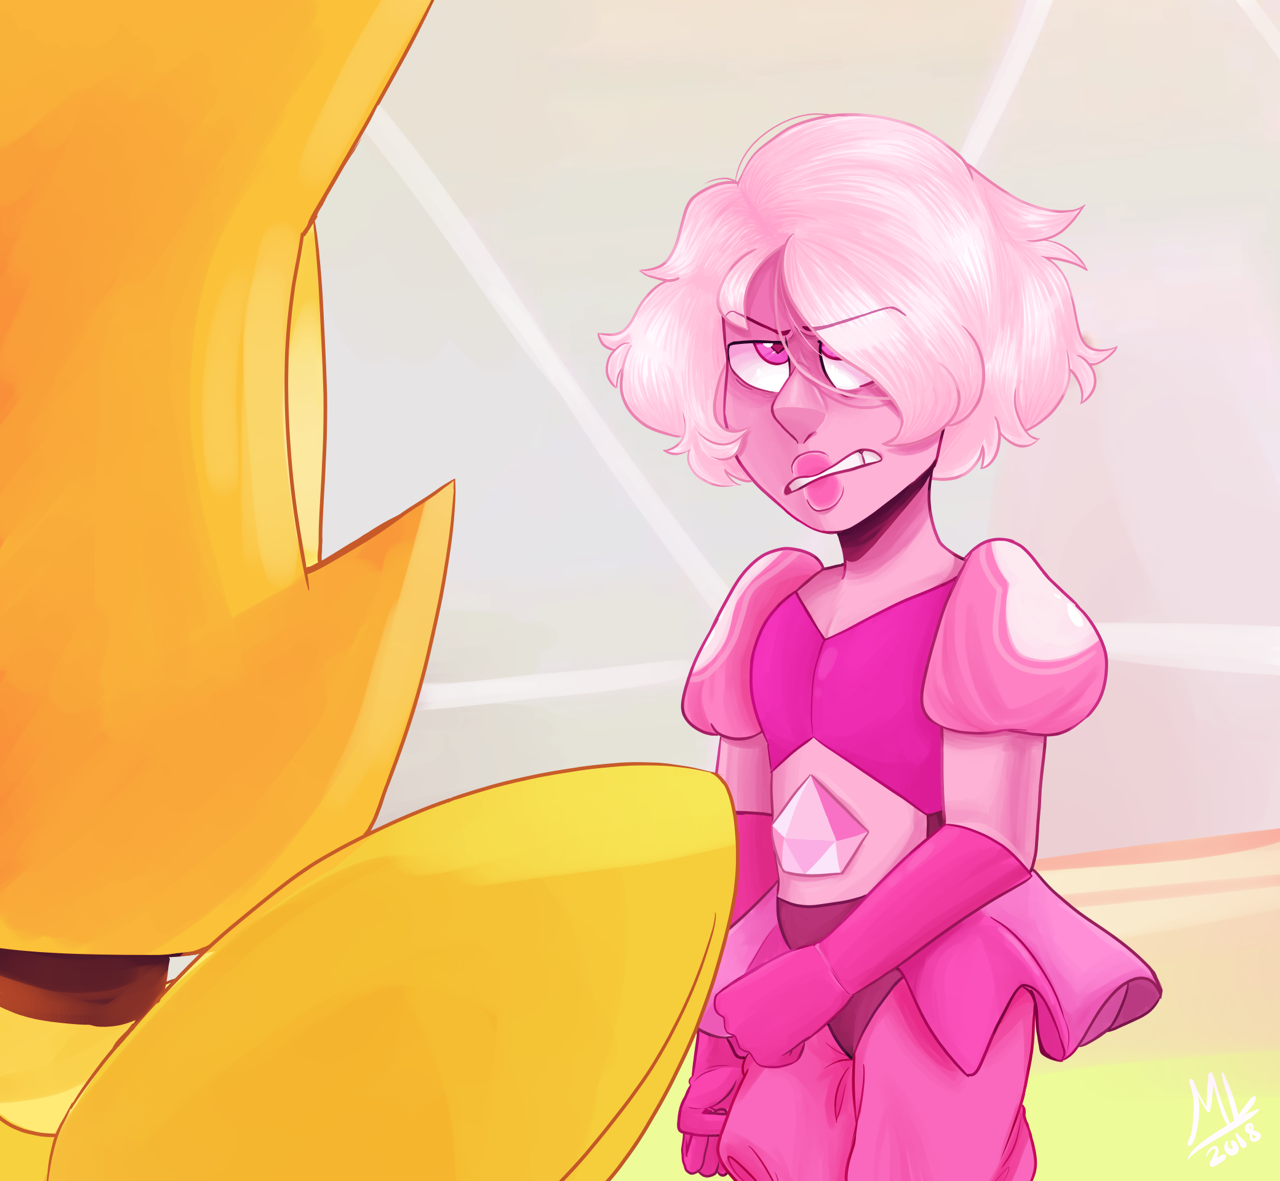 ”Then why don’t you act like it, Pink.”